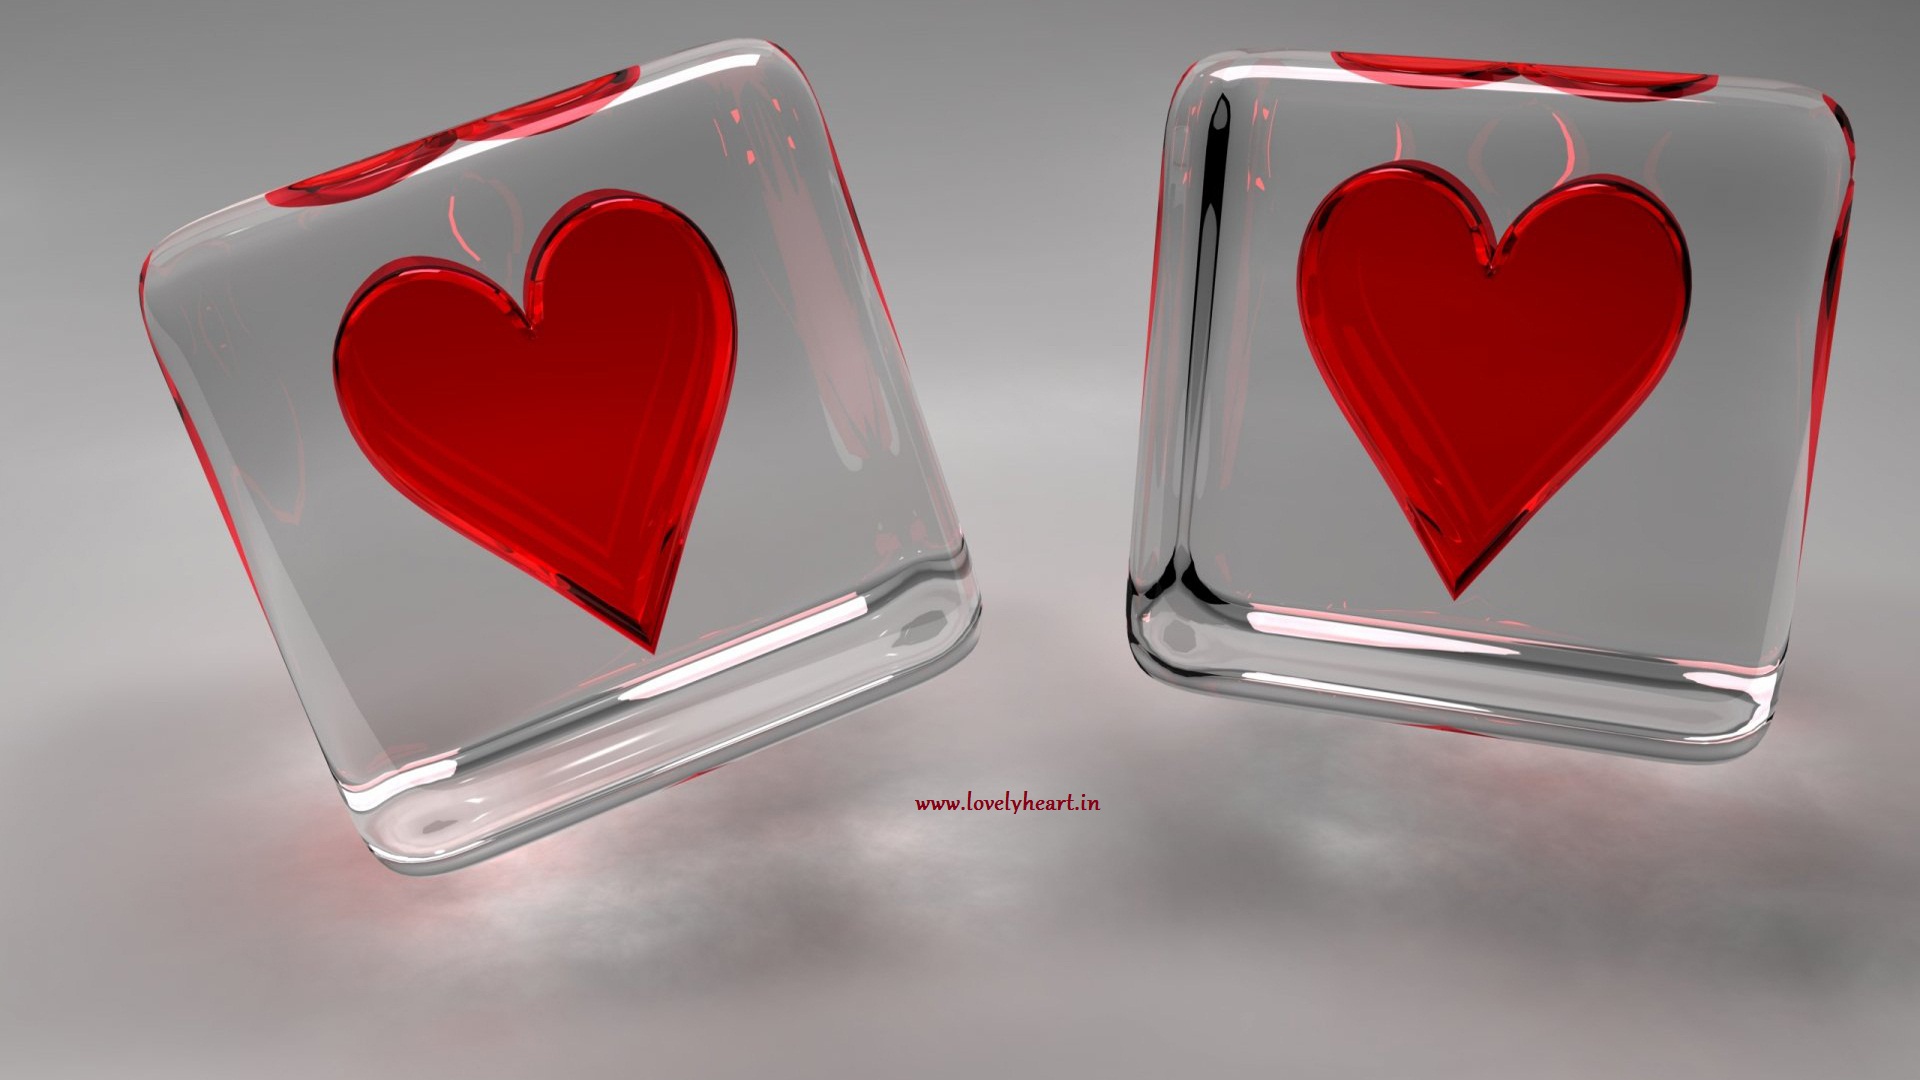 Love Beautiful Cute Heart Image Wallpaper Quotes For Bf